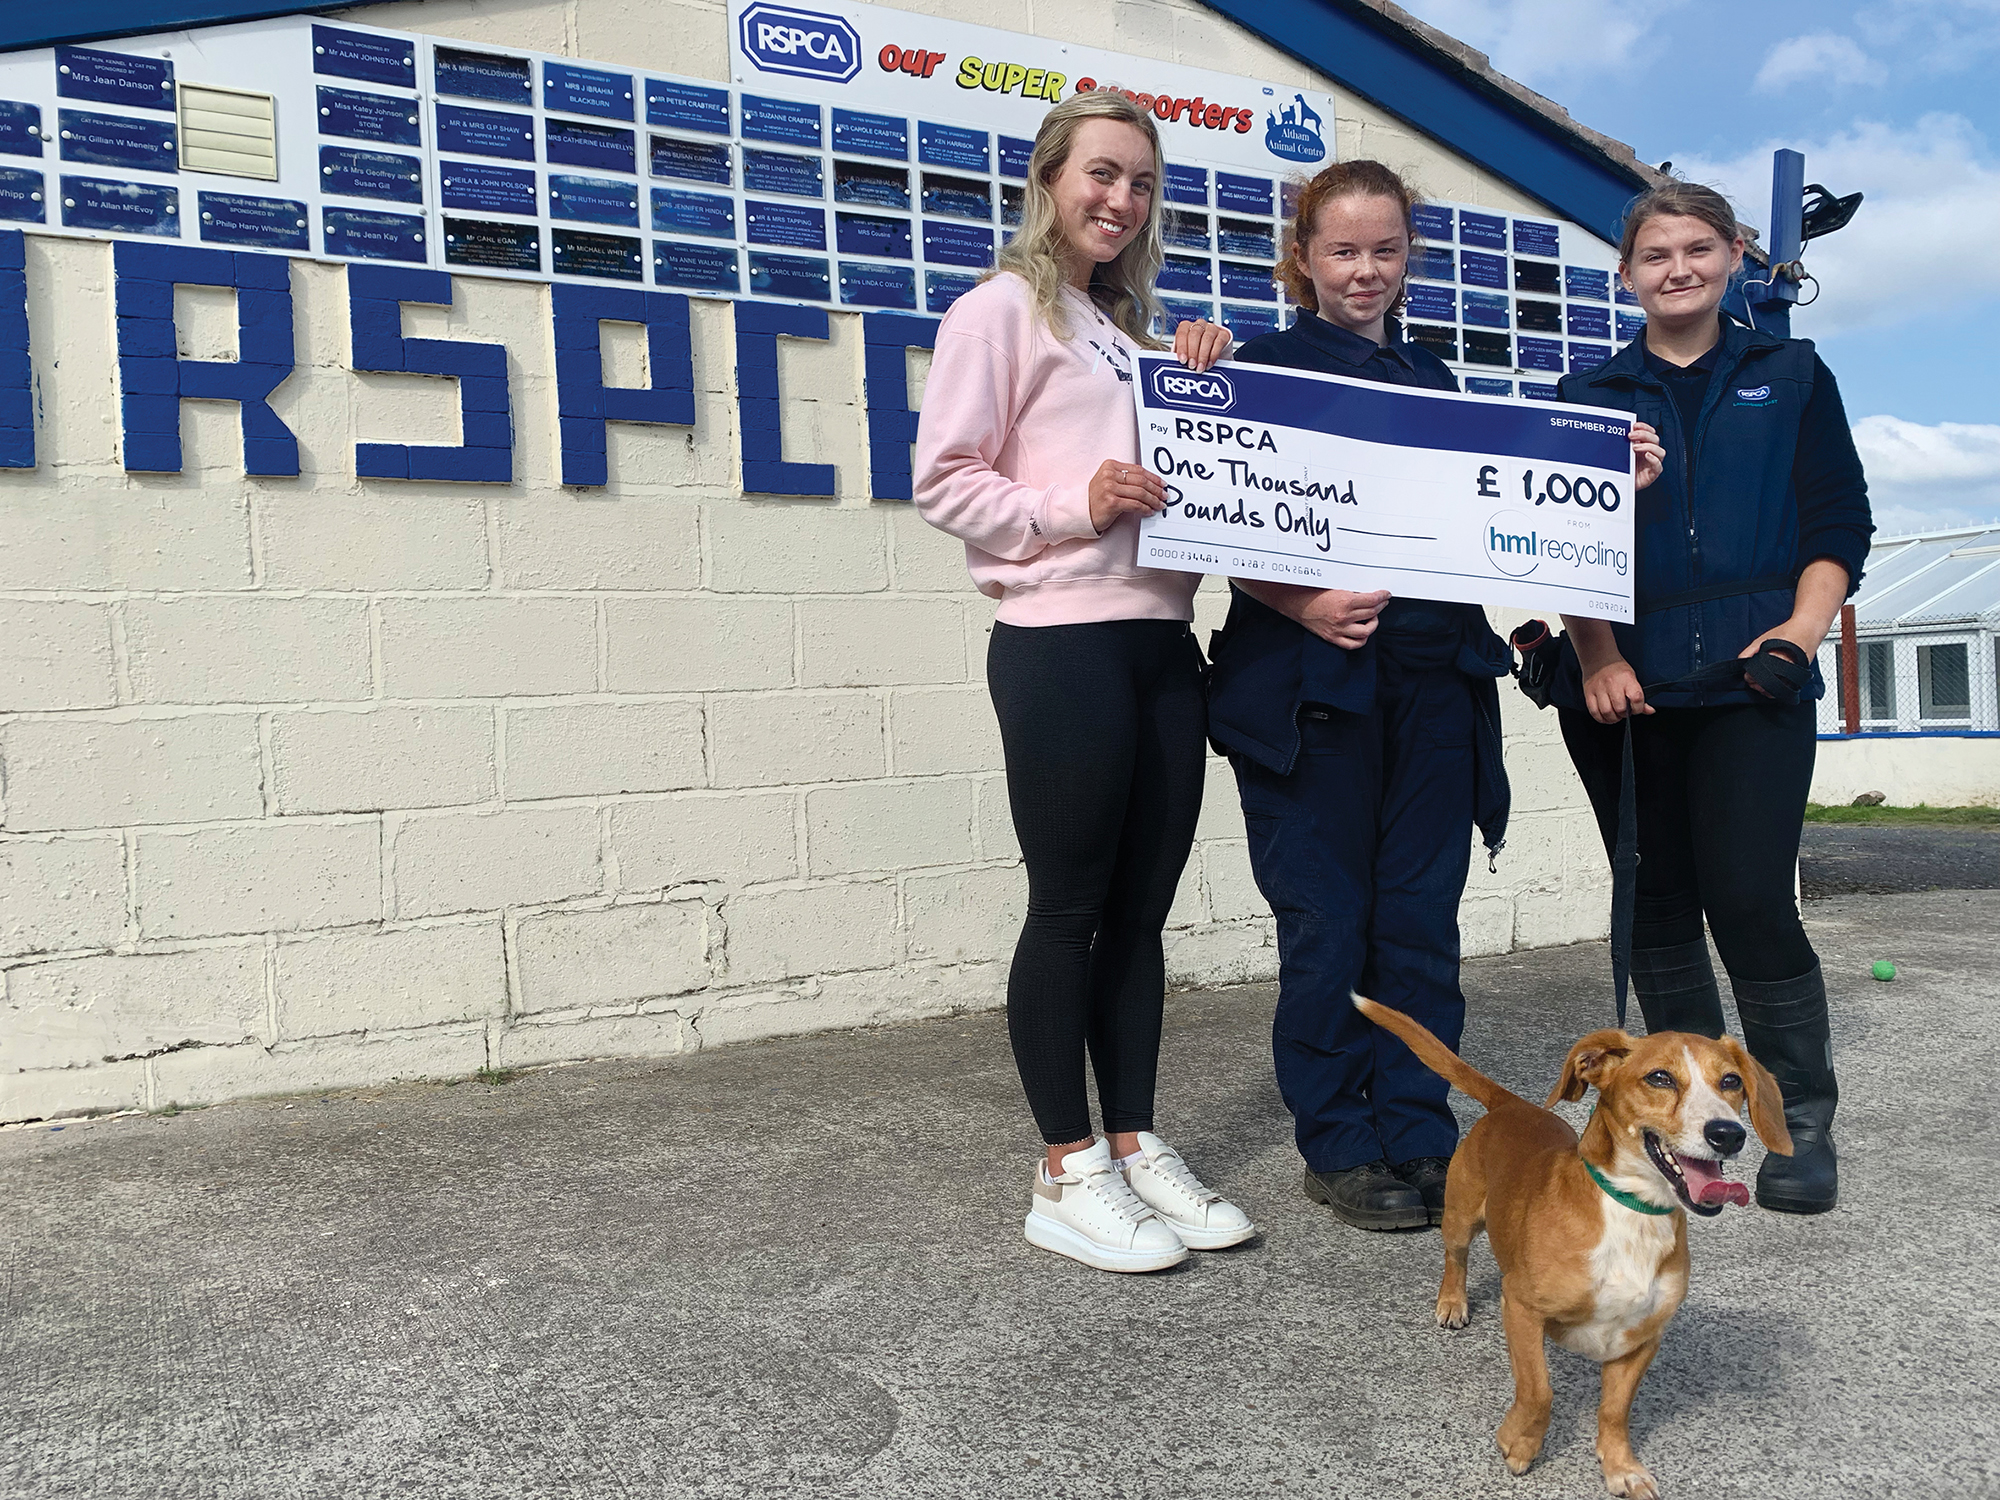 HML Recycling donates £1,000 to struggling Lancashire East Branch of the RSPCA